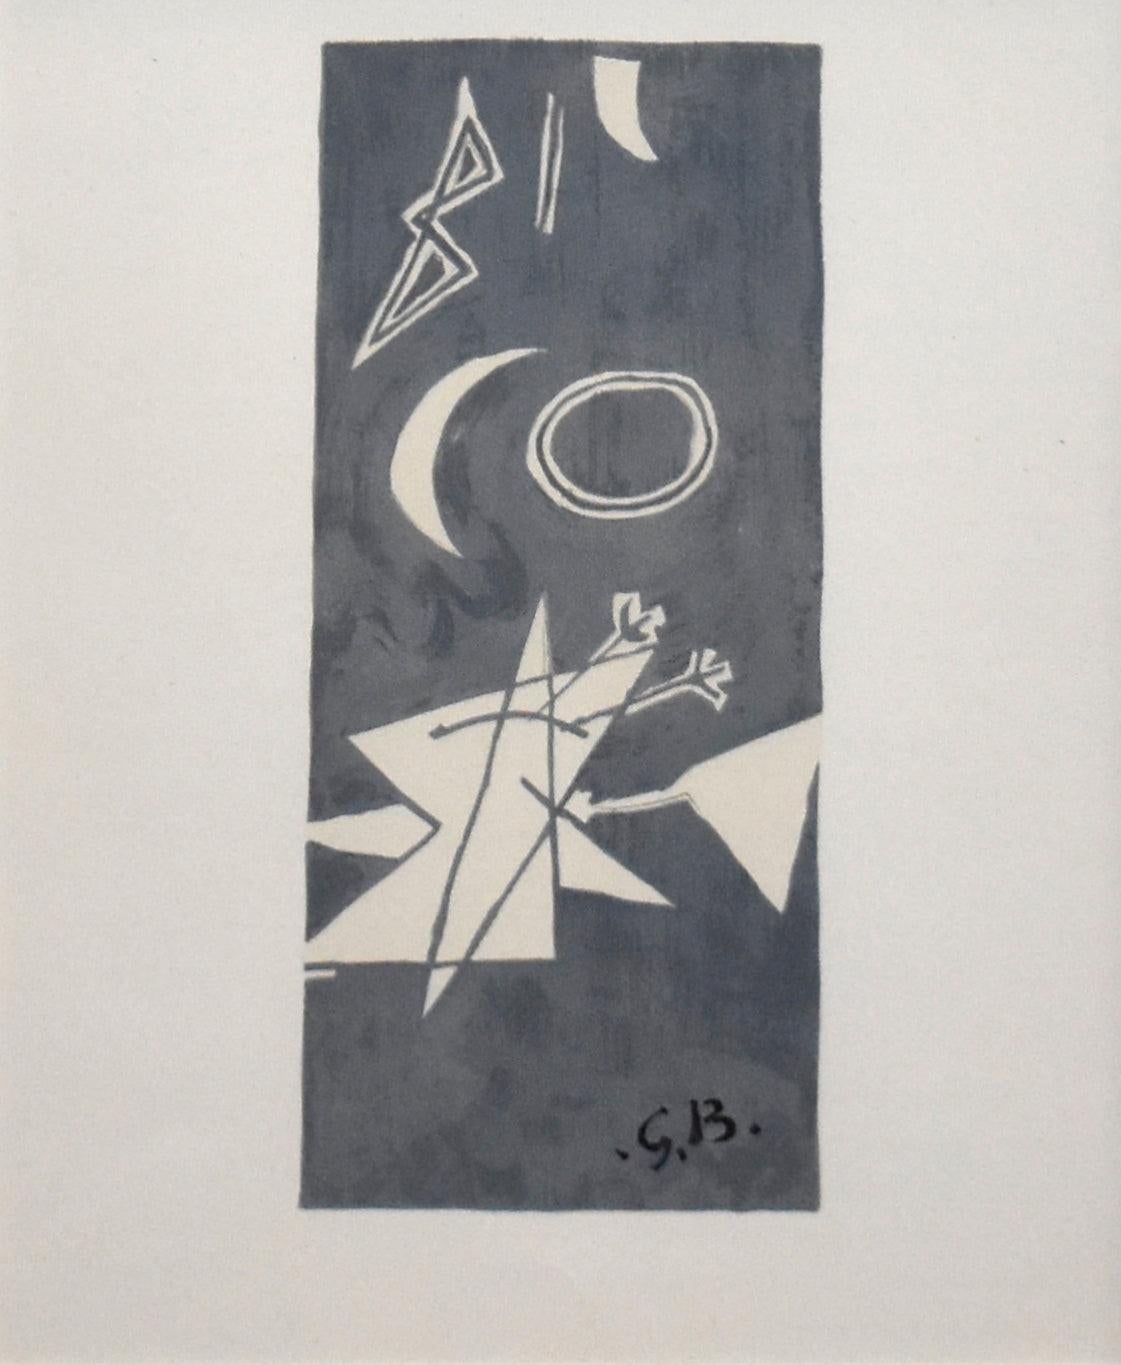 Artist: Georges Braque
Title: Ciel Gris II
Medium: Original lithograph
Year: 1959
Framed Size: 16 1/2 x 14 inches
Sheet Size: 15 x 11 inches
Signed: Unsigned